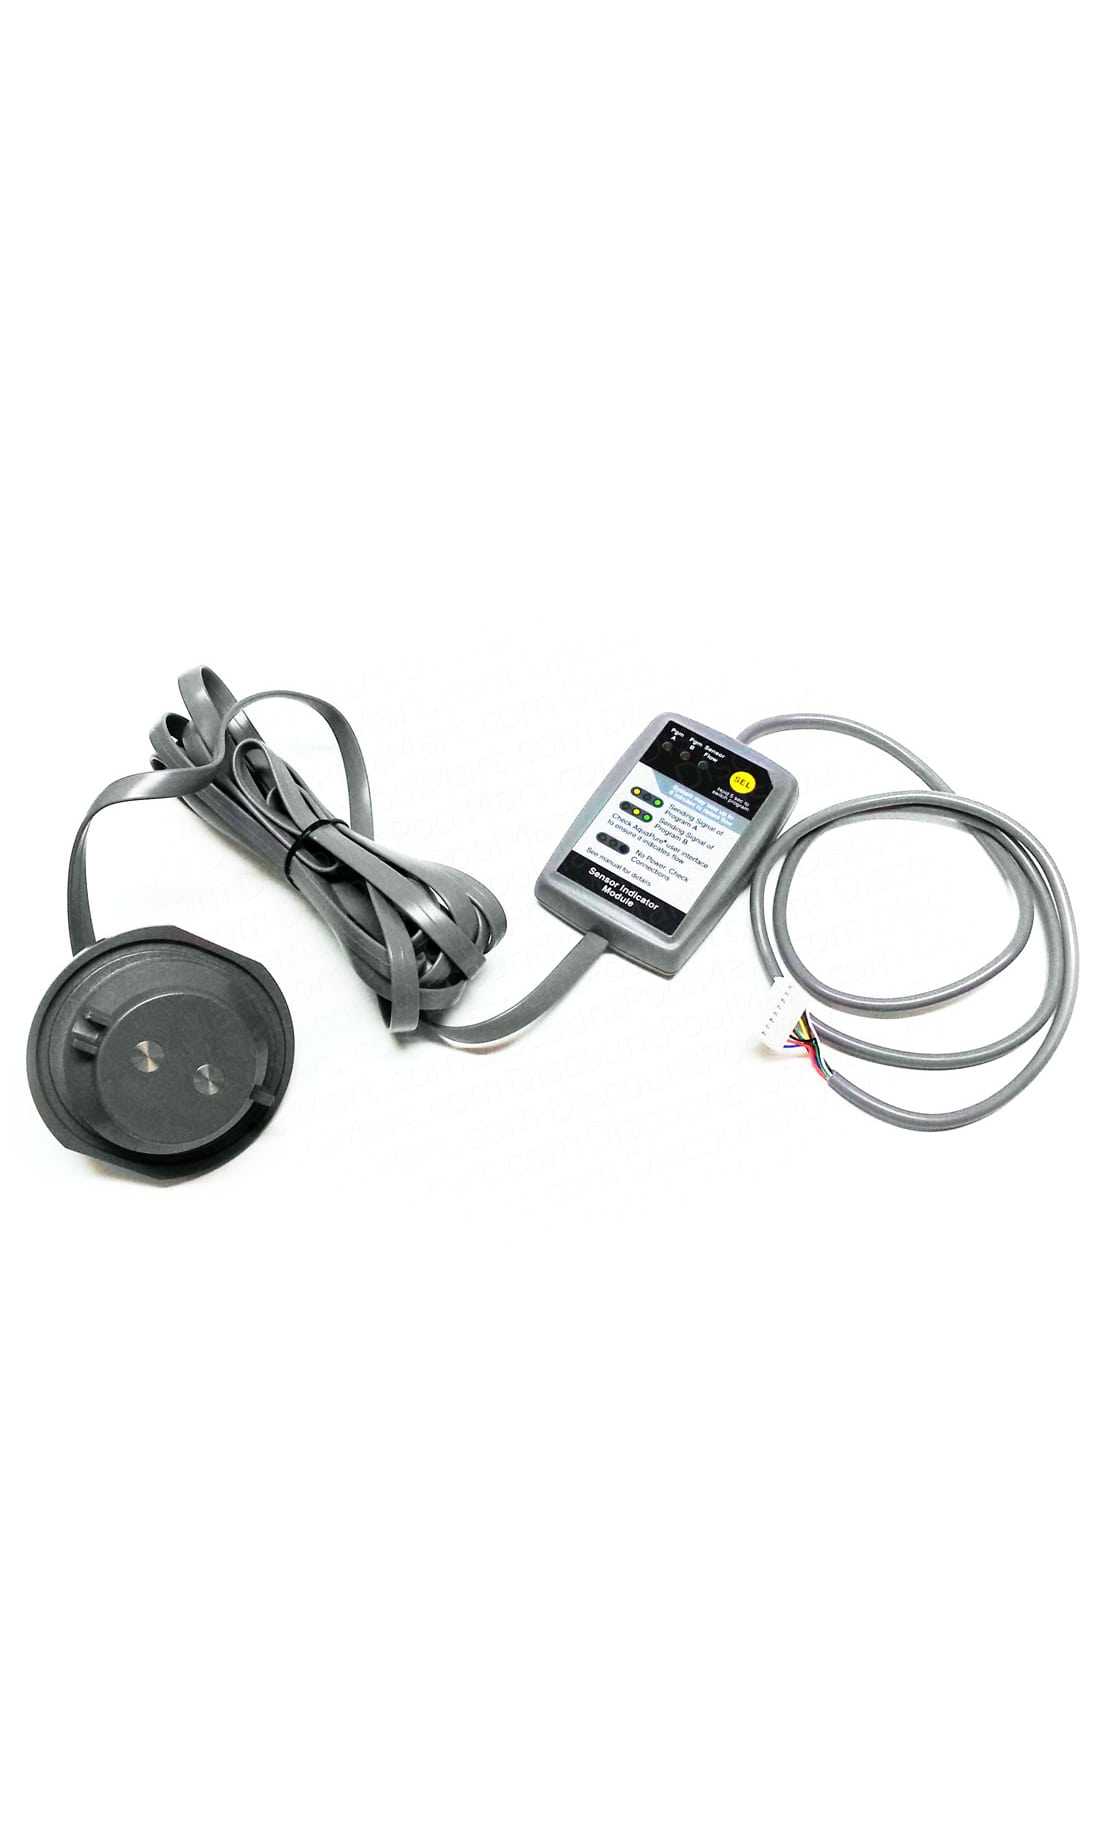 Zodiac Systems | Jandy Pro Series, Jandy AquaPure | Fusion Soft Slotted Flow Sensor, 3-Port Cell (25') - R0476400